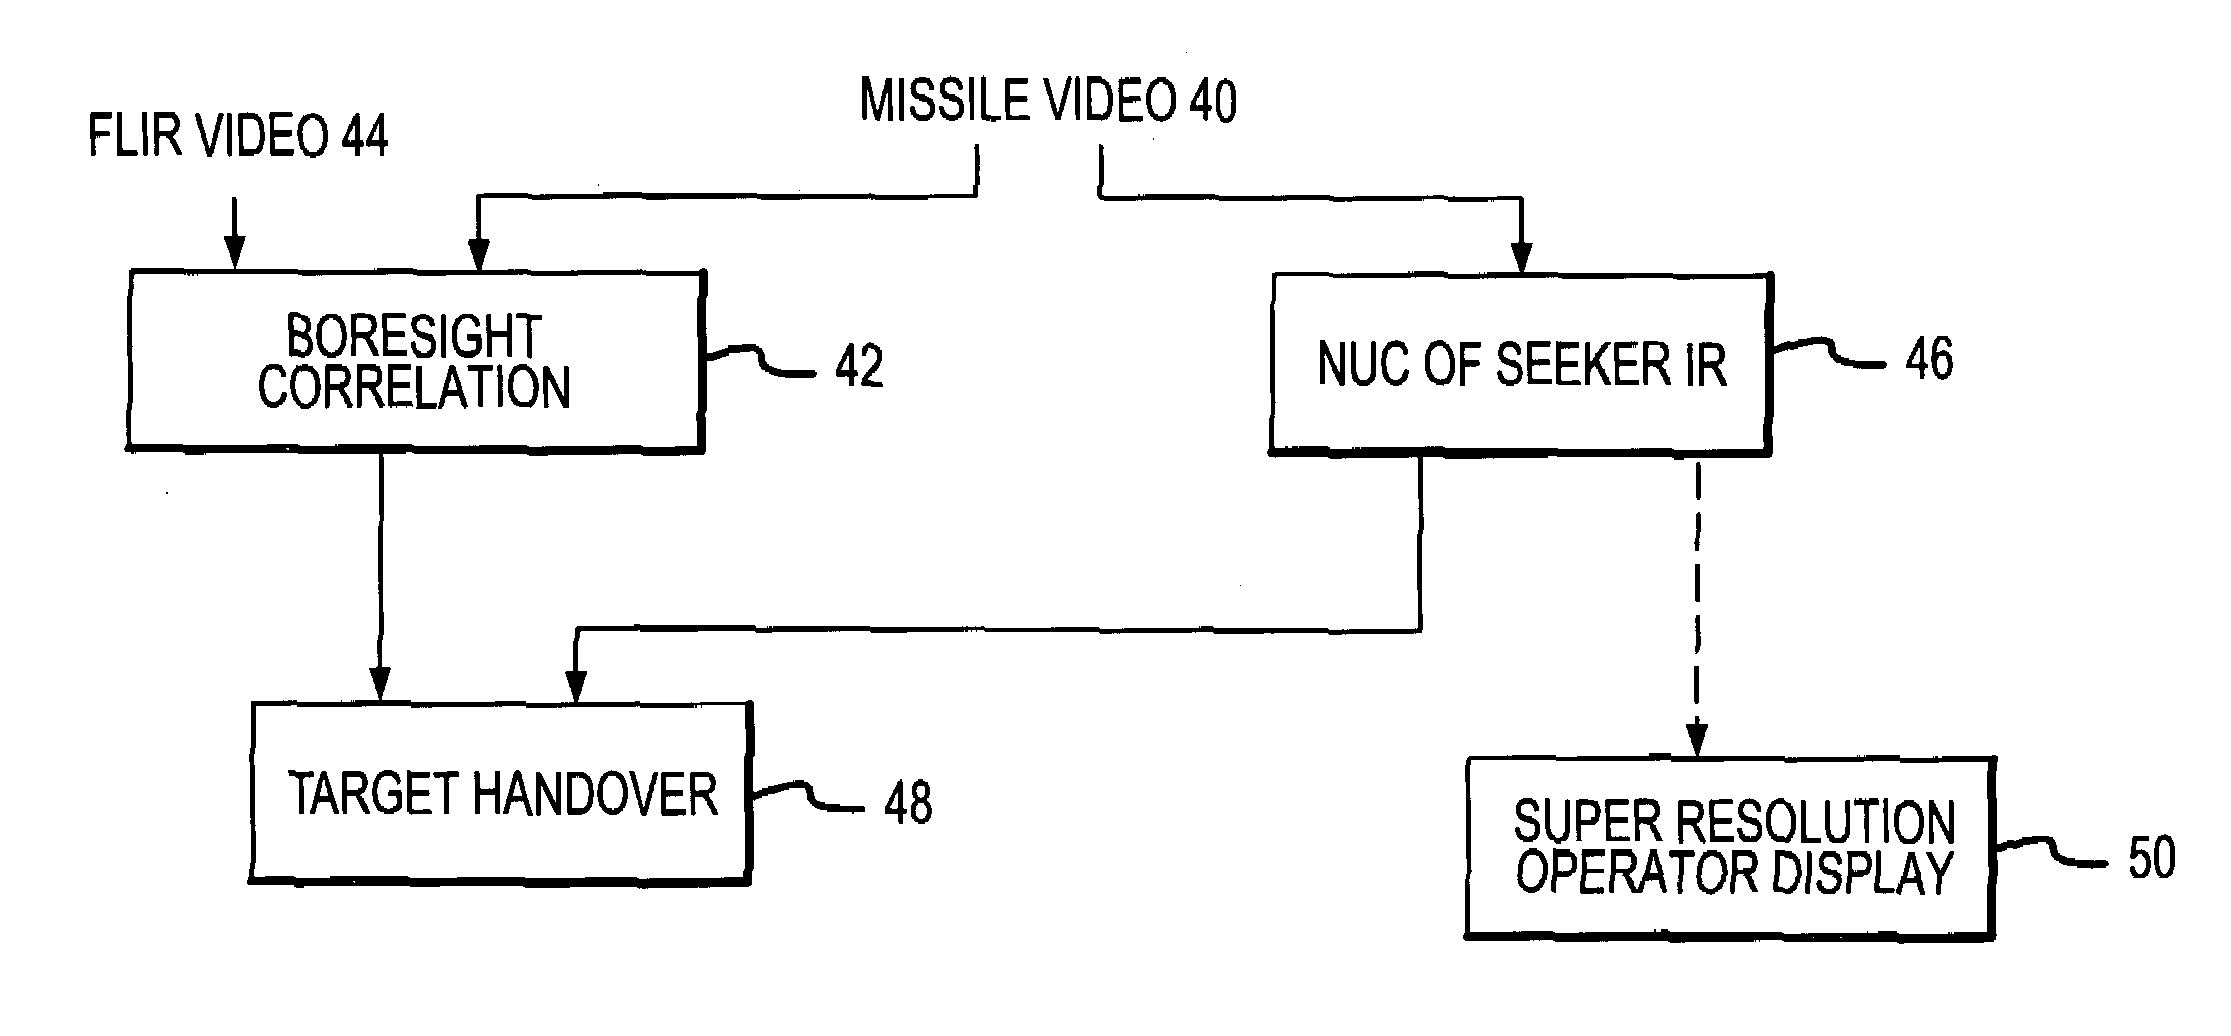 FLIR-to-missile boresight correlation and non-uniformity compensation of the missile seeker